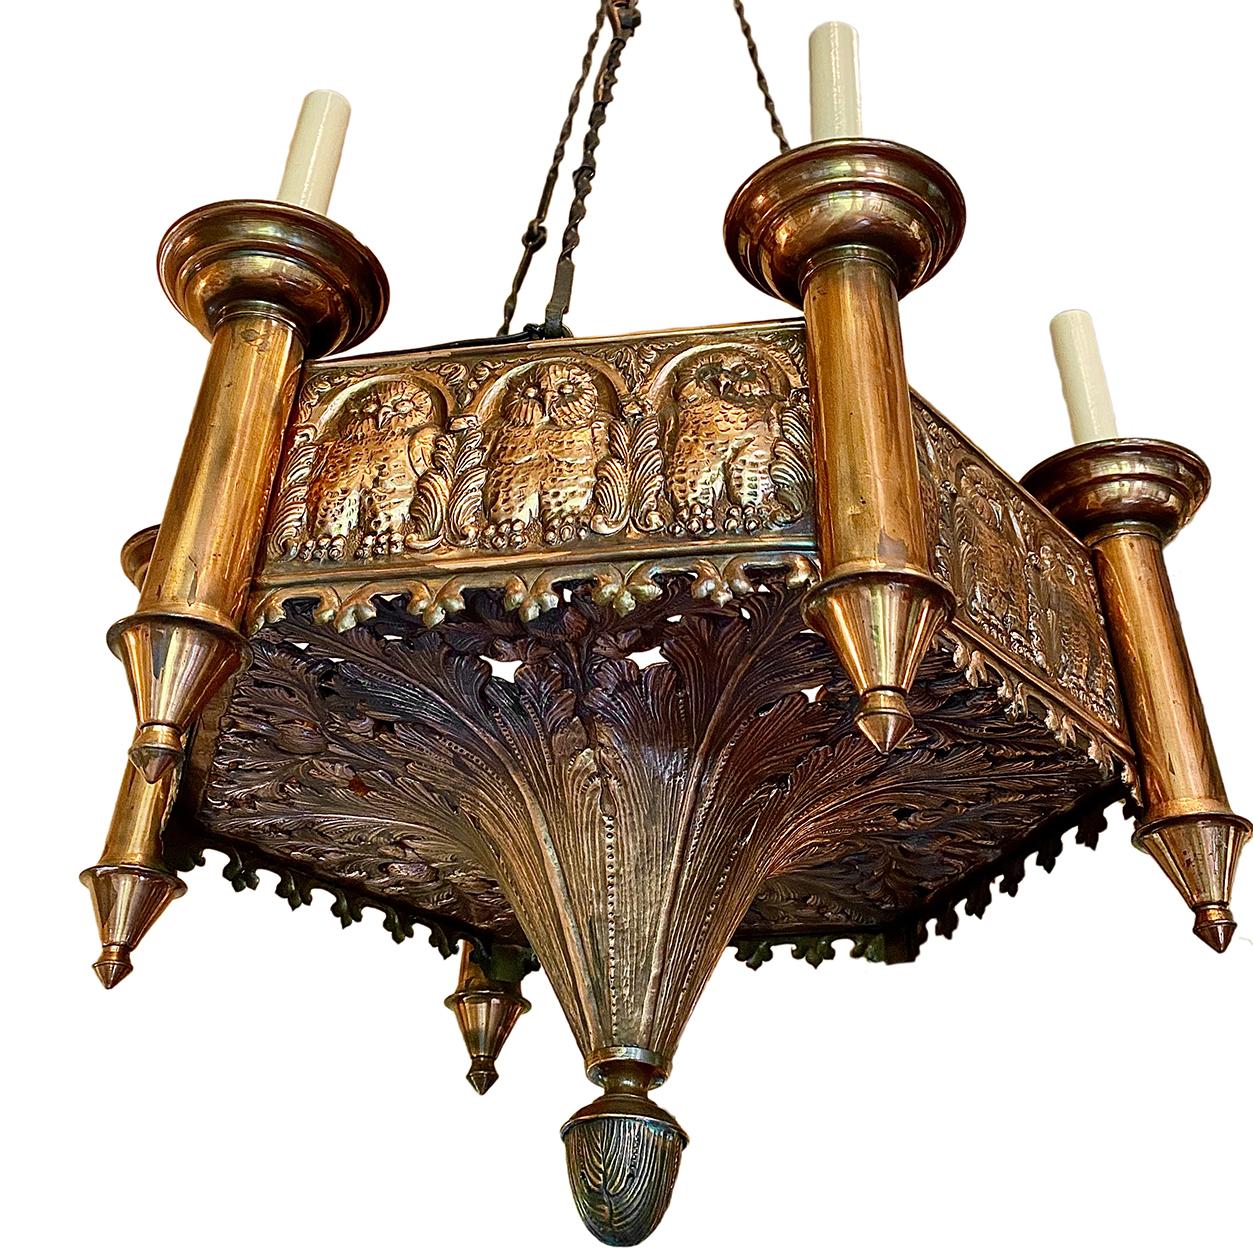 A circa 1900 Swedish copper six-light chandelier with owl motif on the body.

Measurements:
Diameter: 24.5